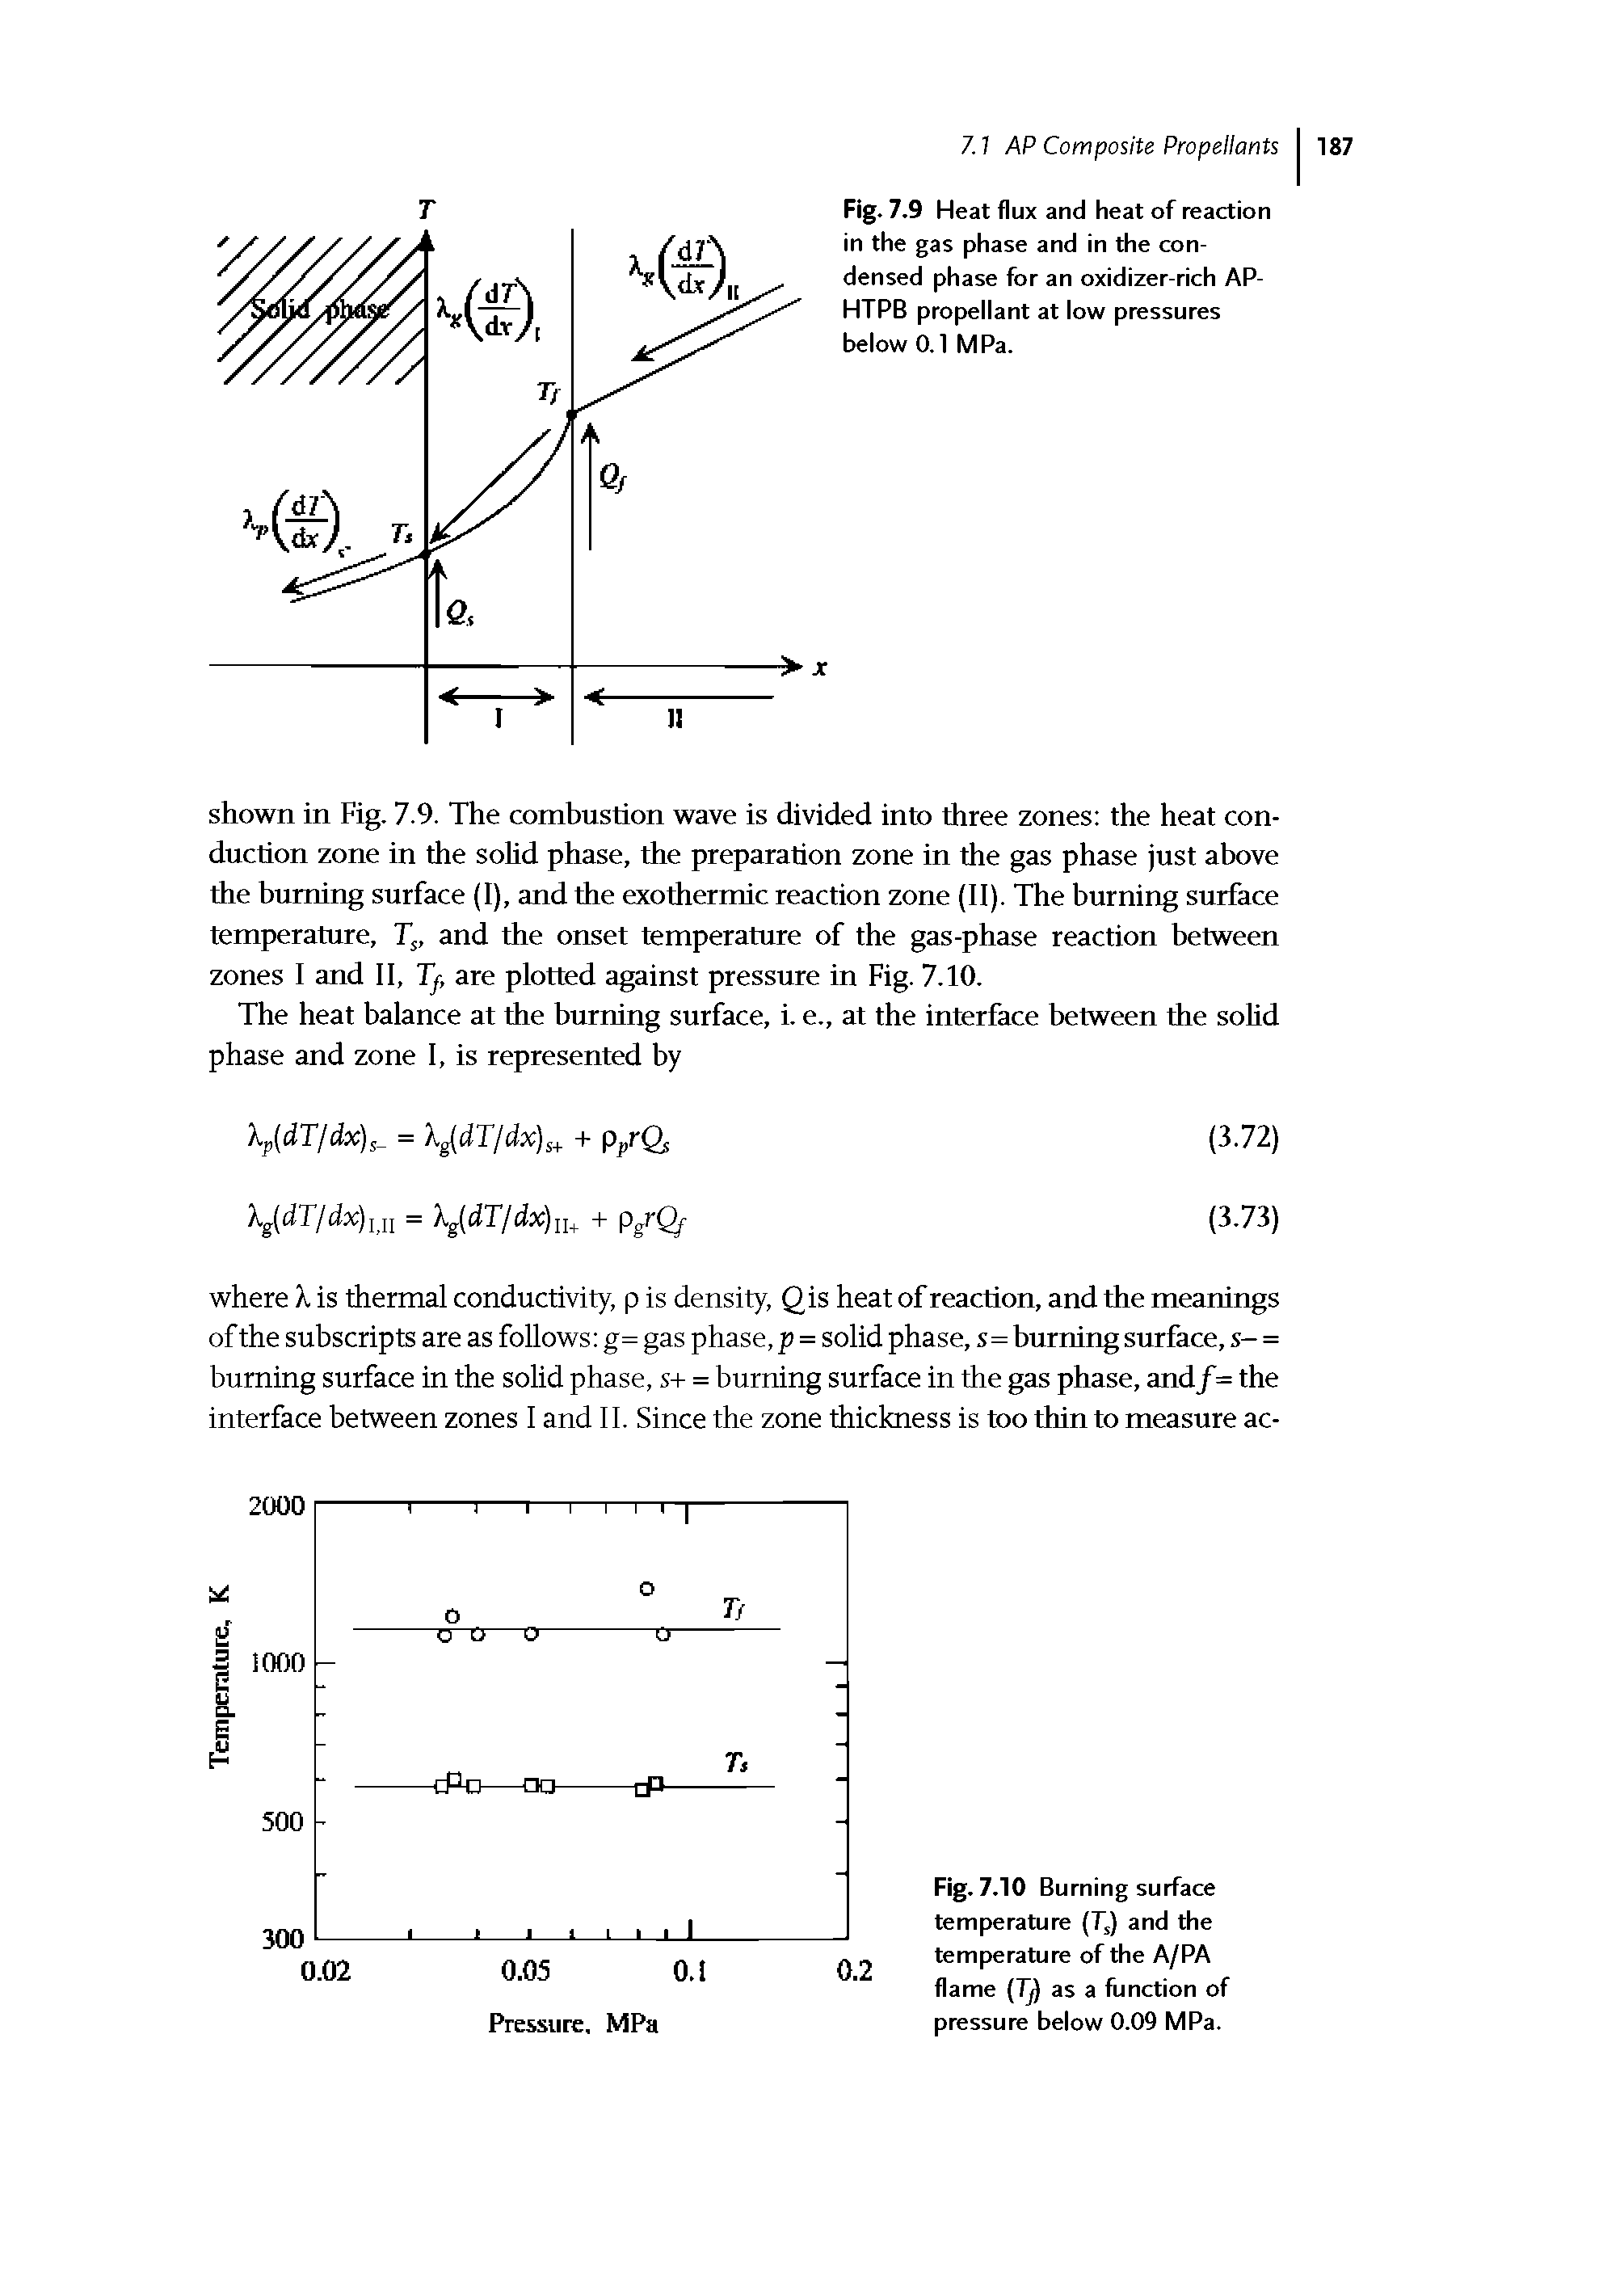 Fig. 7.9 Heat flux and heat of reaction in the gas phase and in the condensed phase for an oxidizer-rich AP-HTPB propellant at low pressures below 0.1 M Pa.